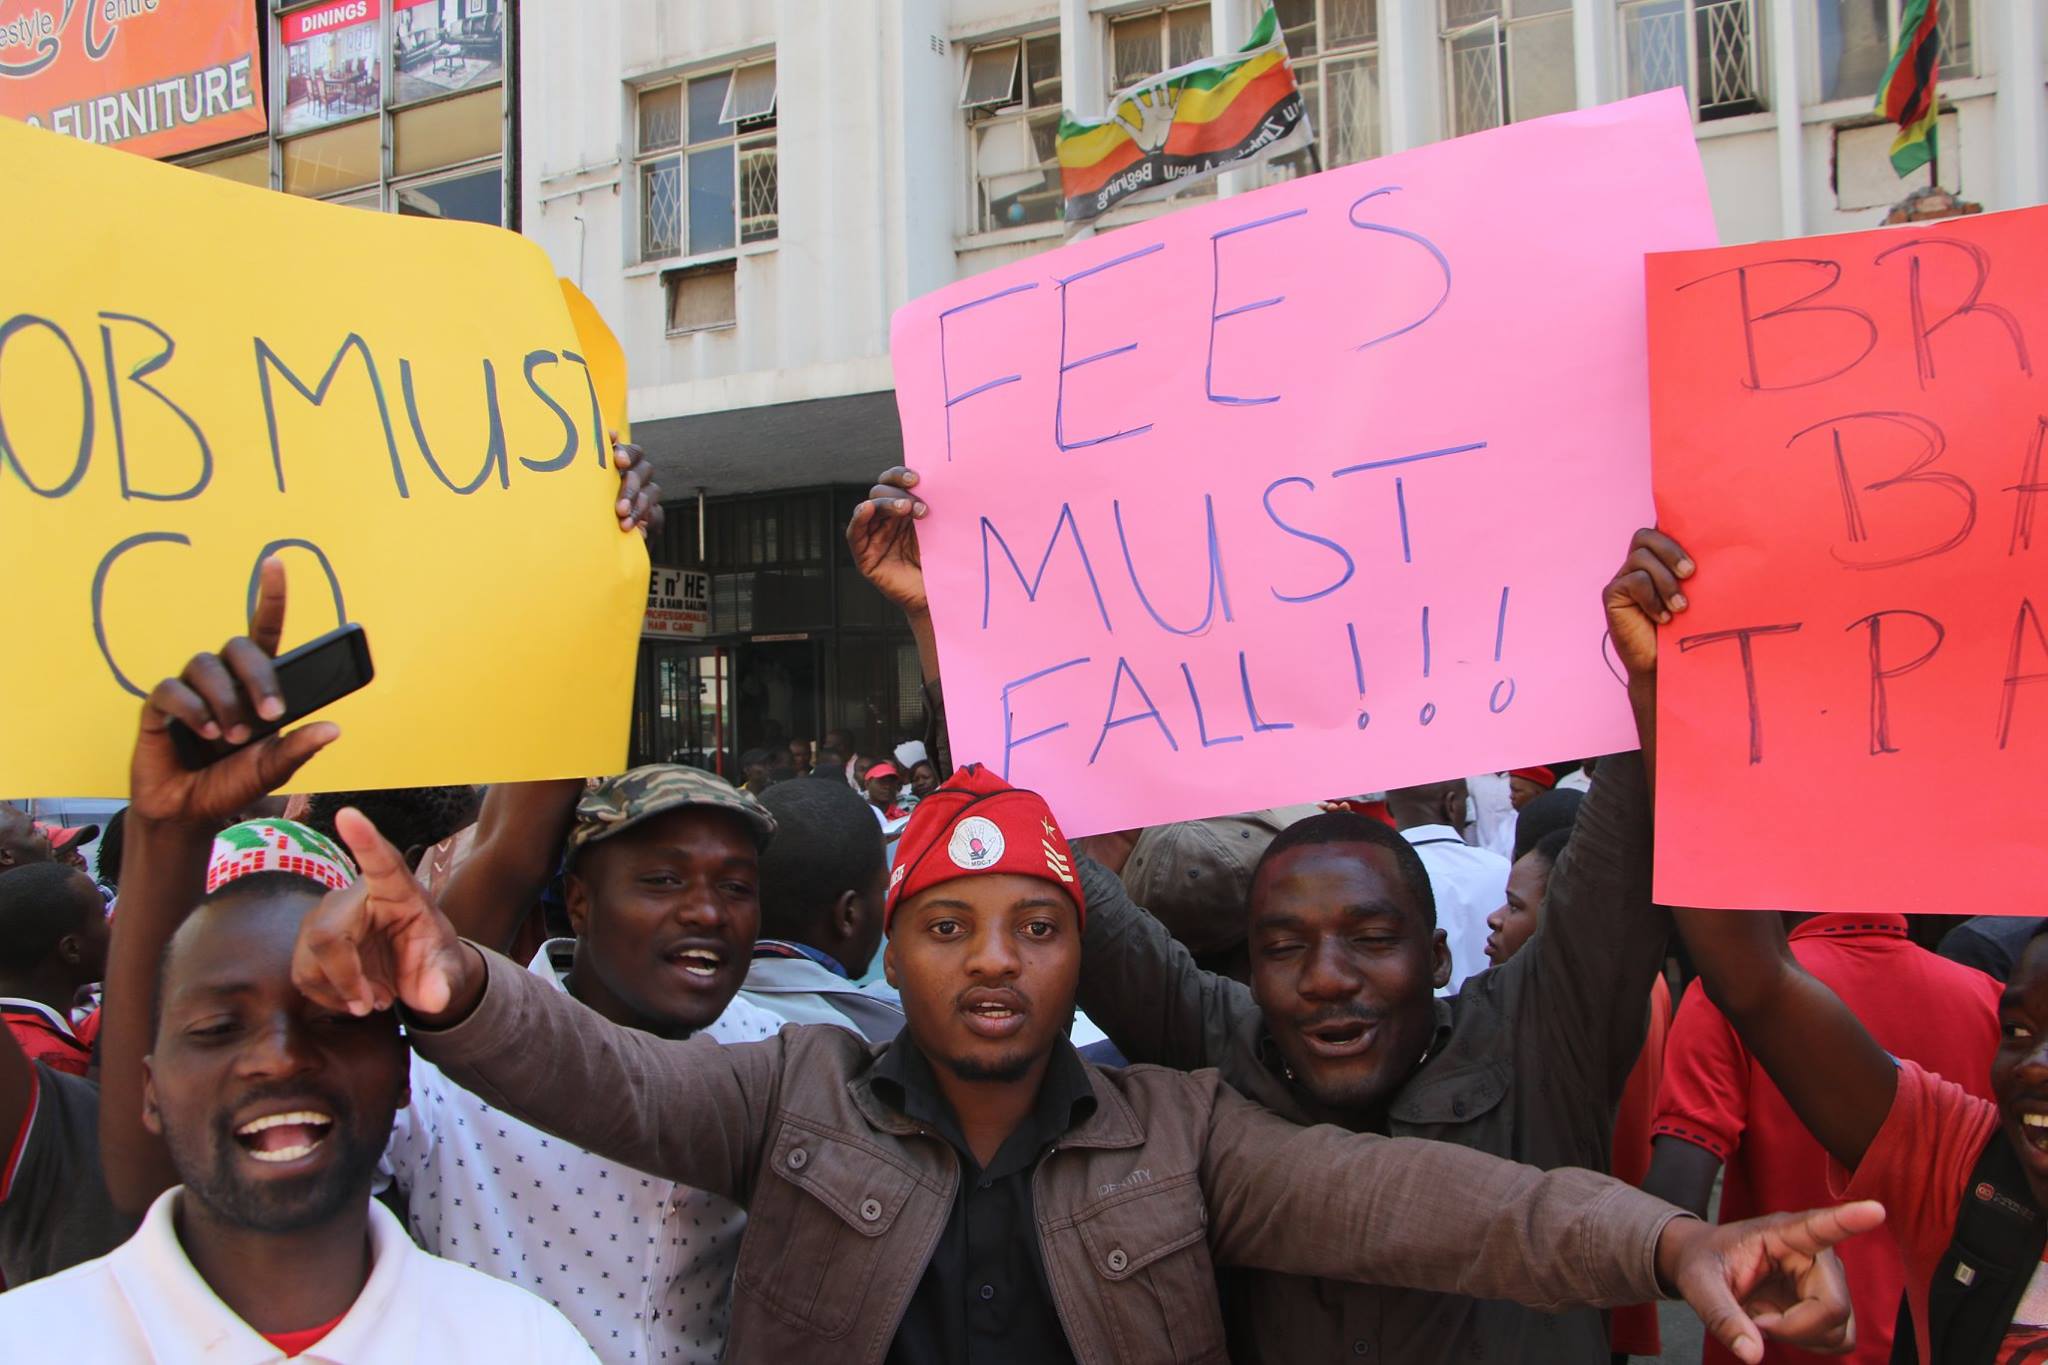 The demonstration, #MyZimbabwe, was organised by the MDC-T youth wing which says it is angered by increasing heavy-handedness of the police when dealing with protesters